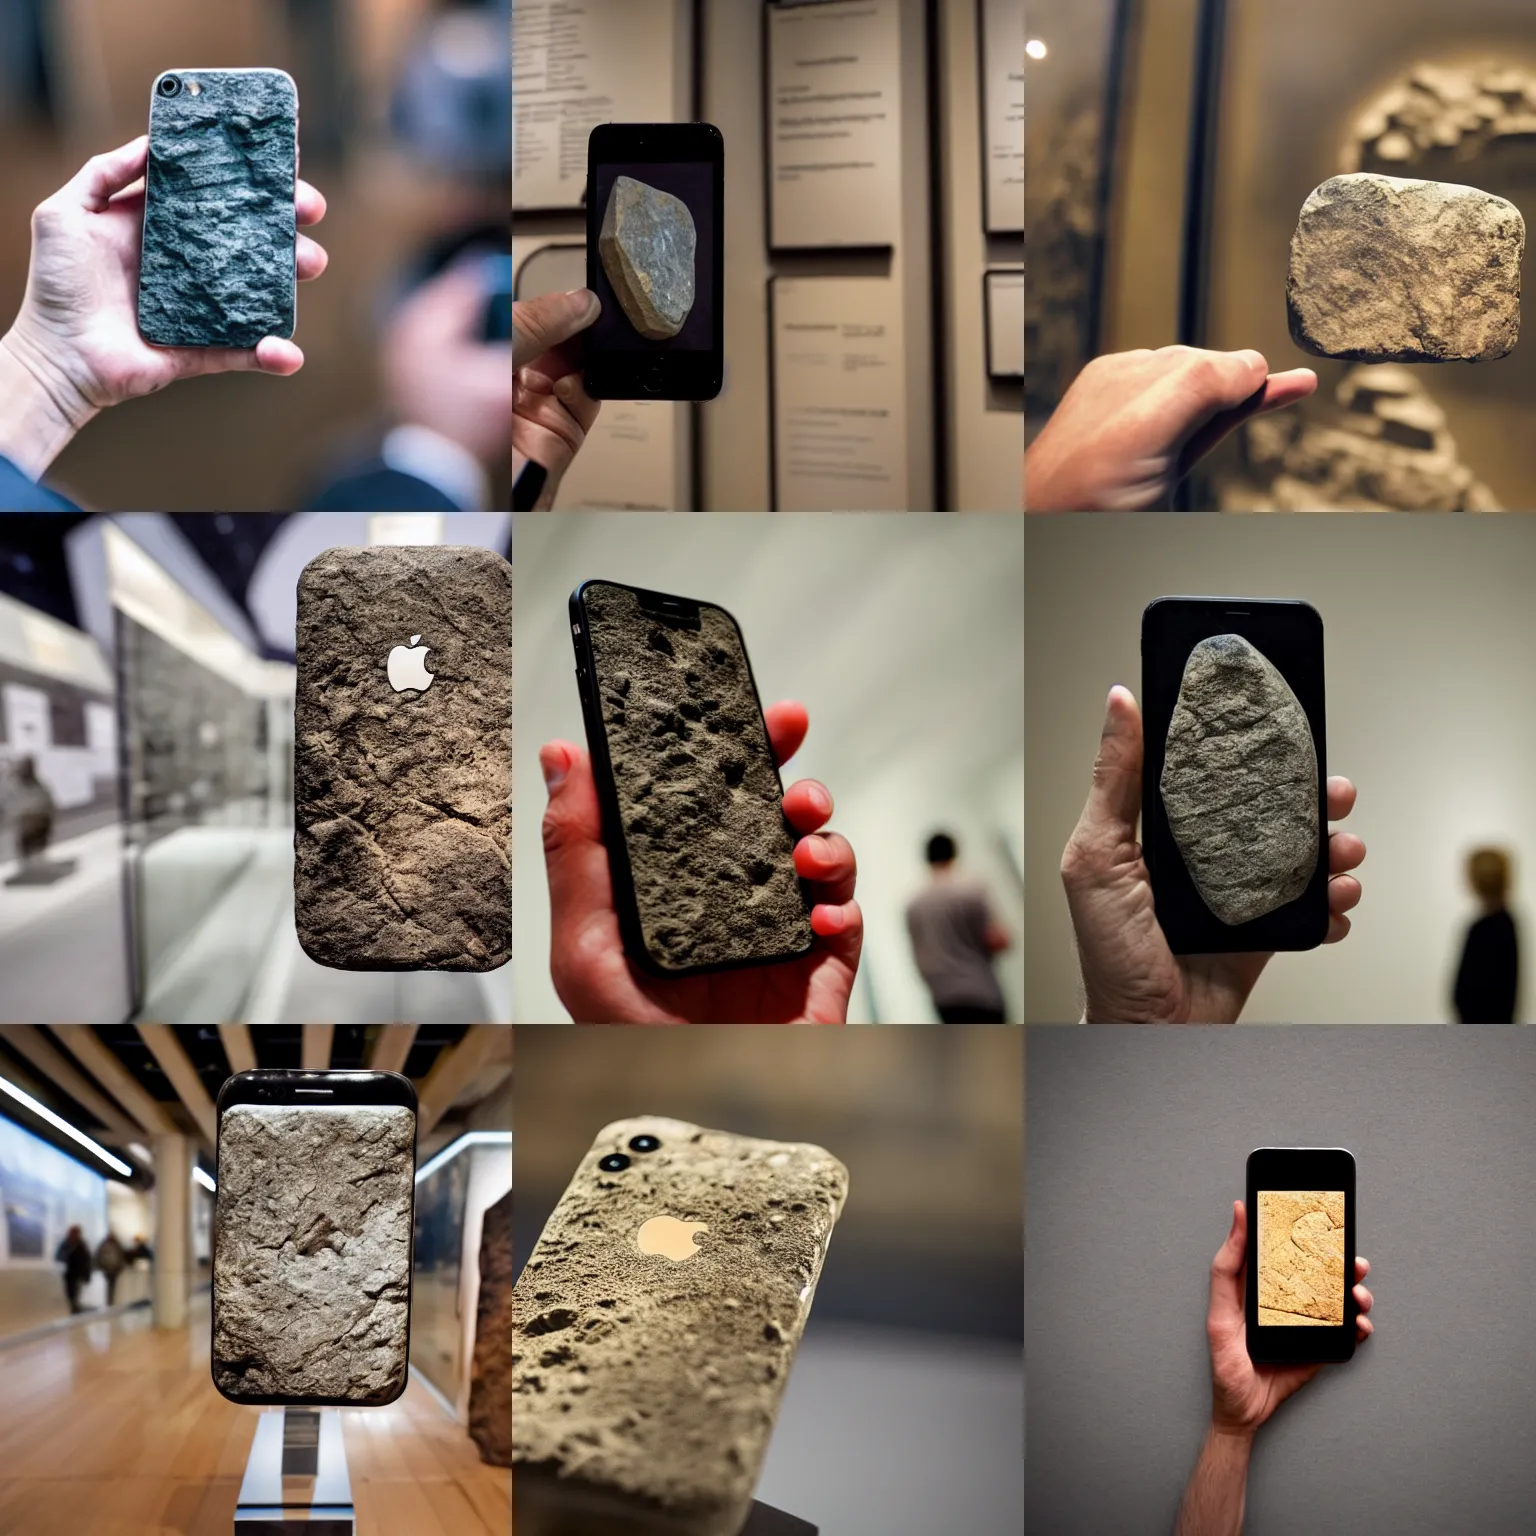 Prompt: fossil of a stone iphone from the year 1 5 0 0 bc placed in an ancient history museum, 4 k, real, archeological exhibit, shot from afar, people looking at the exhibit through glass